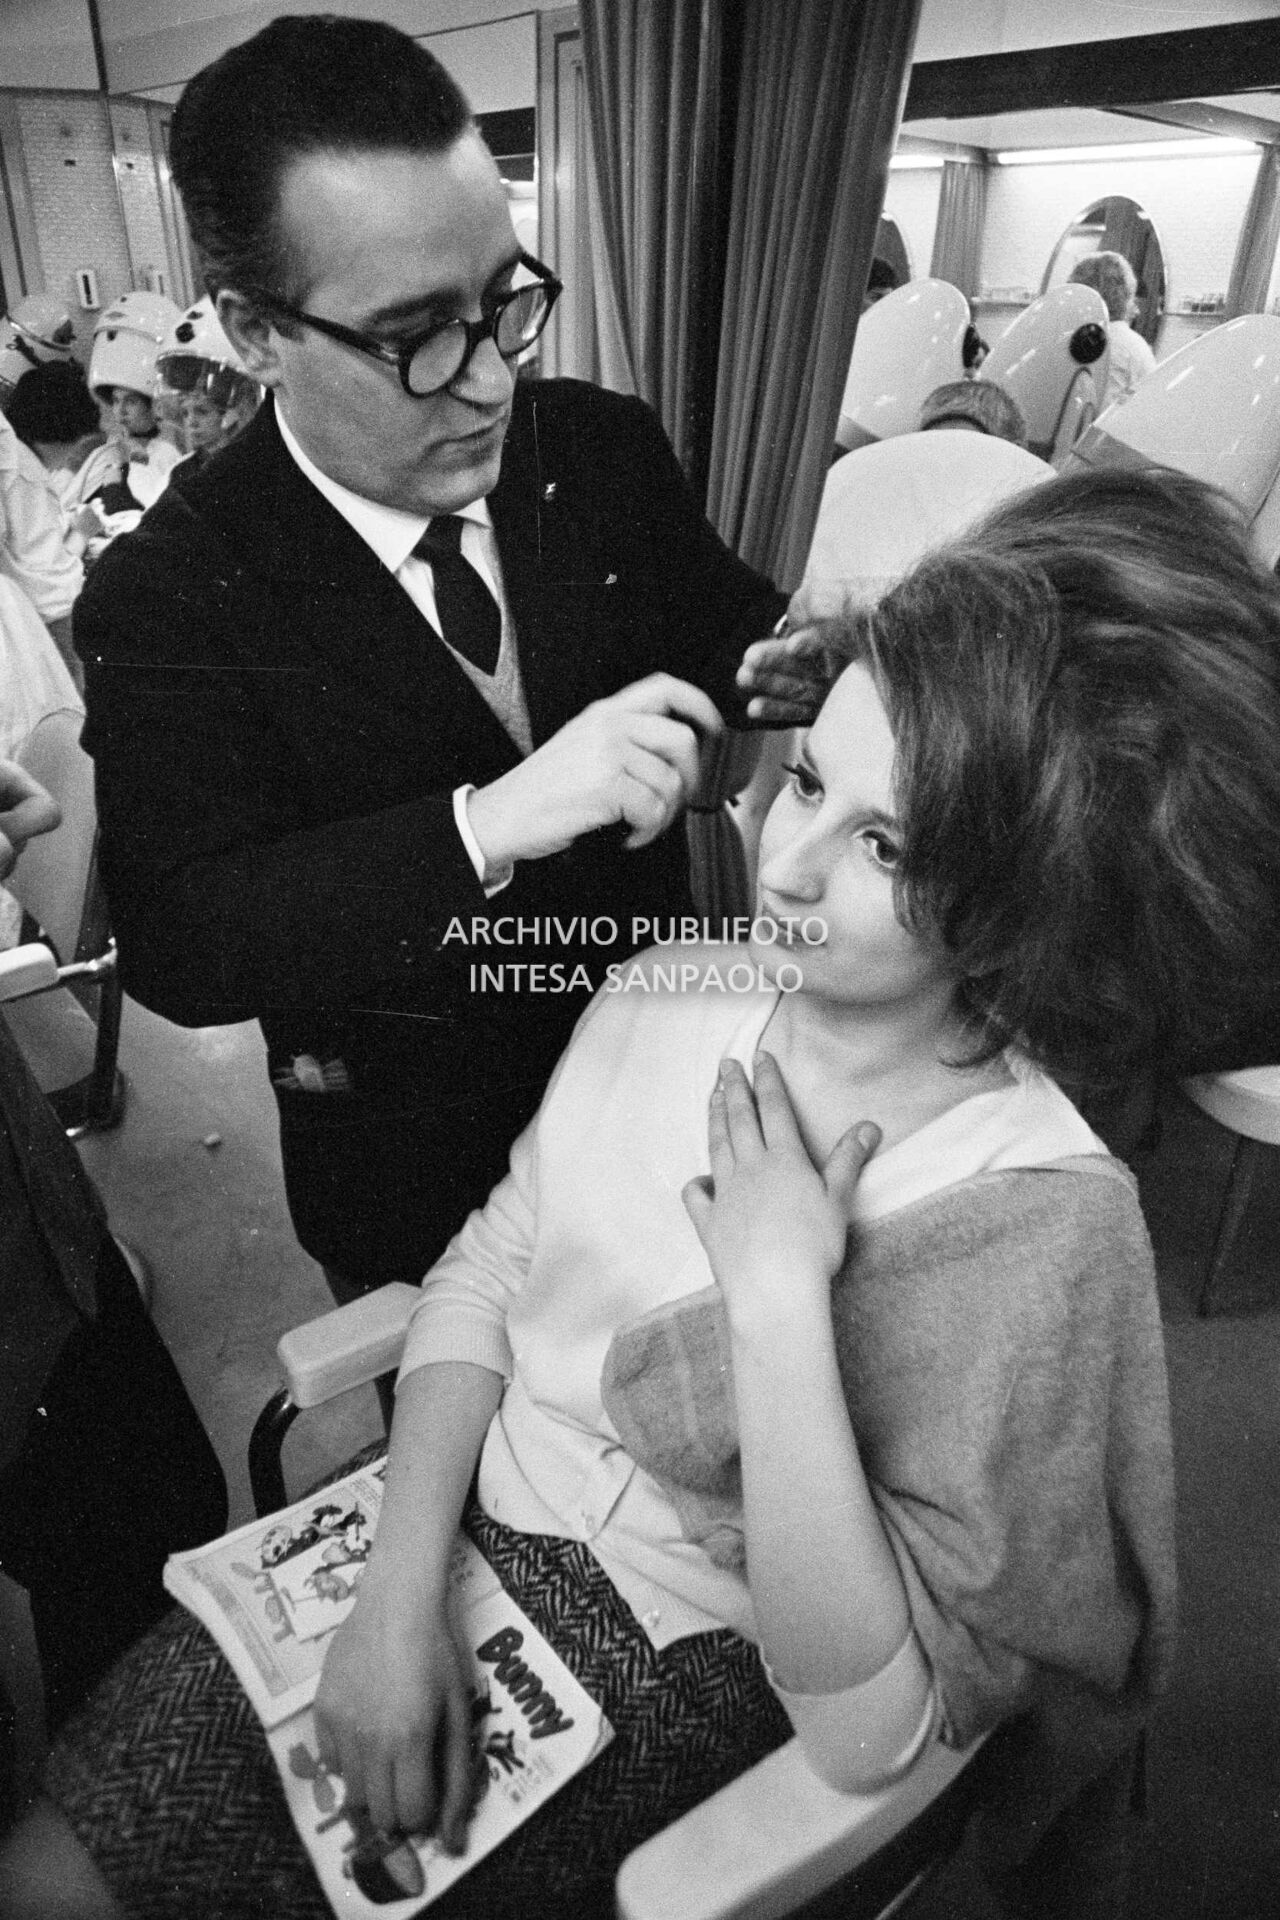 Mina getting her hair done during the 11th Sanremo Festival